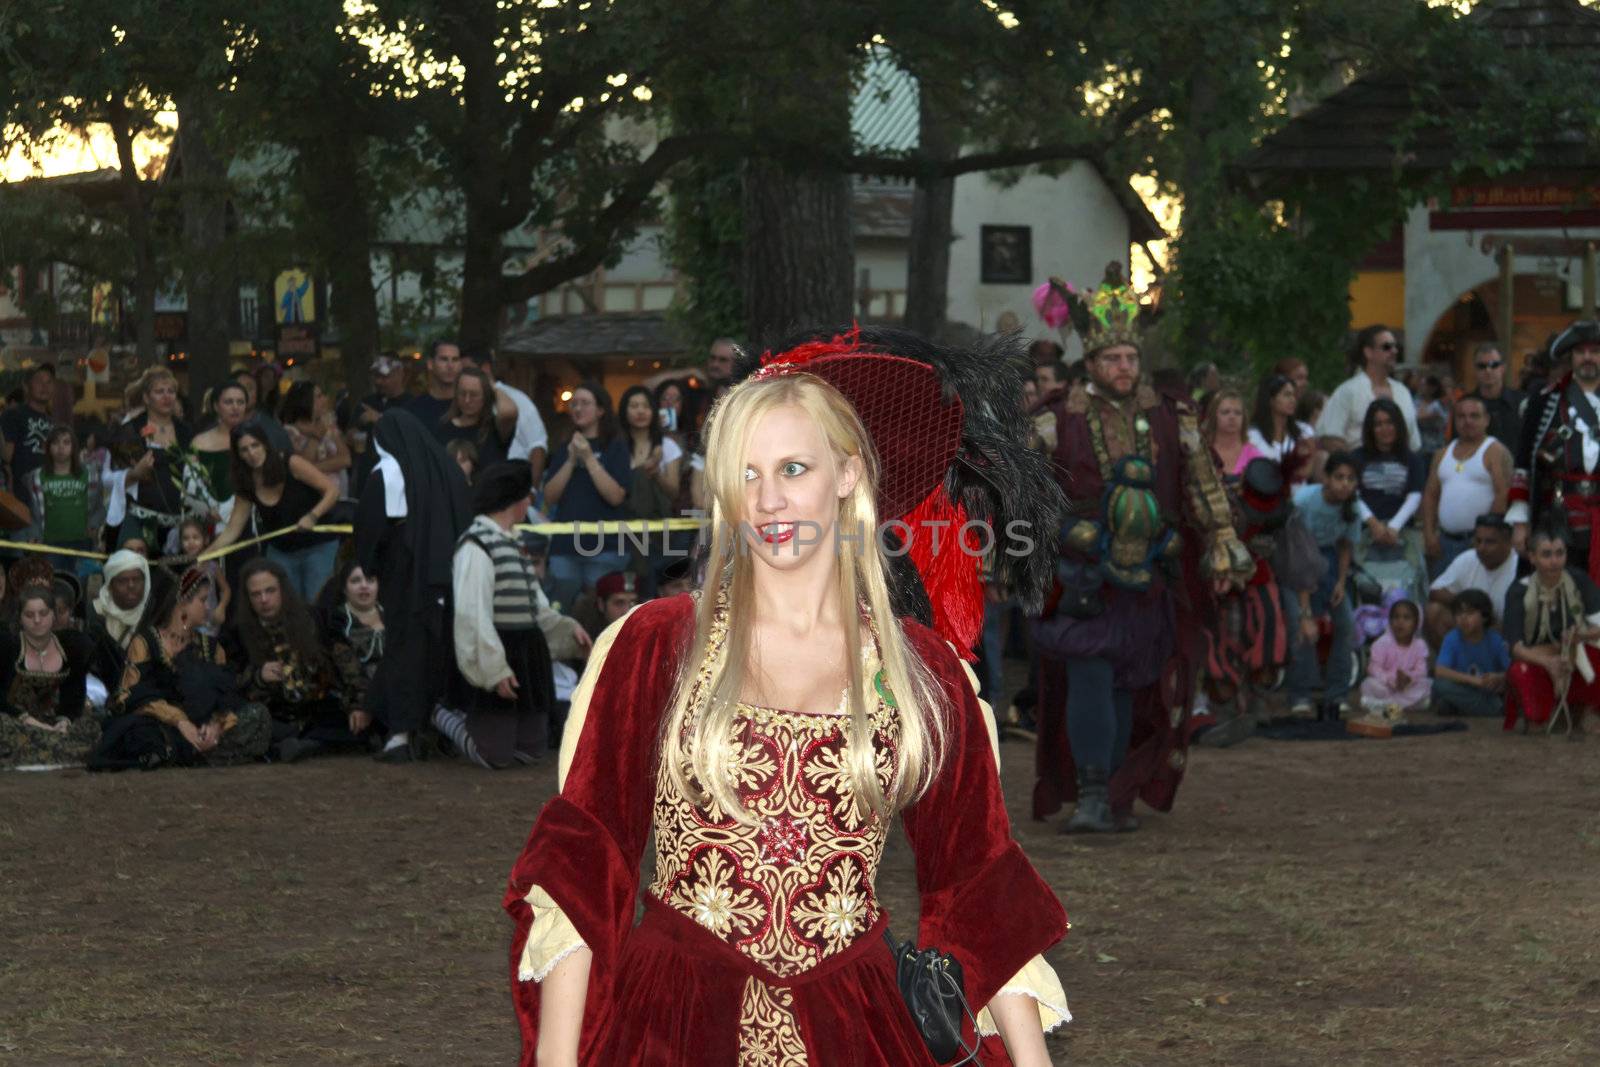 MISSION, TX – OCTOBER 2009: Women performer working at the Texas Renaissance Festival, known as the largest in the state and taken on October 17, 2009 in Mission, Texas.